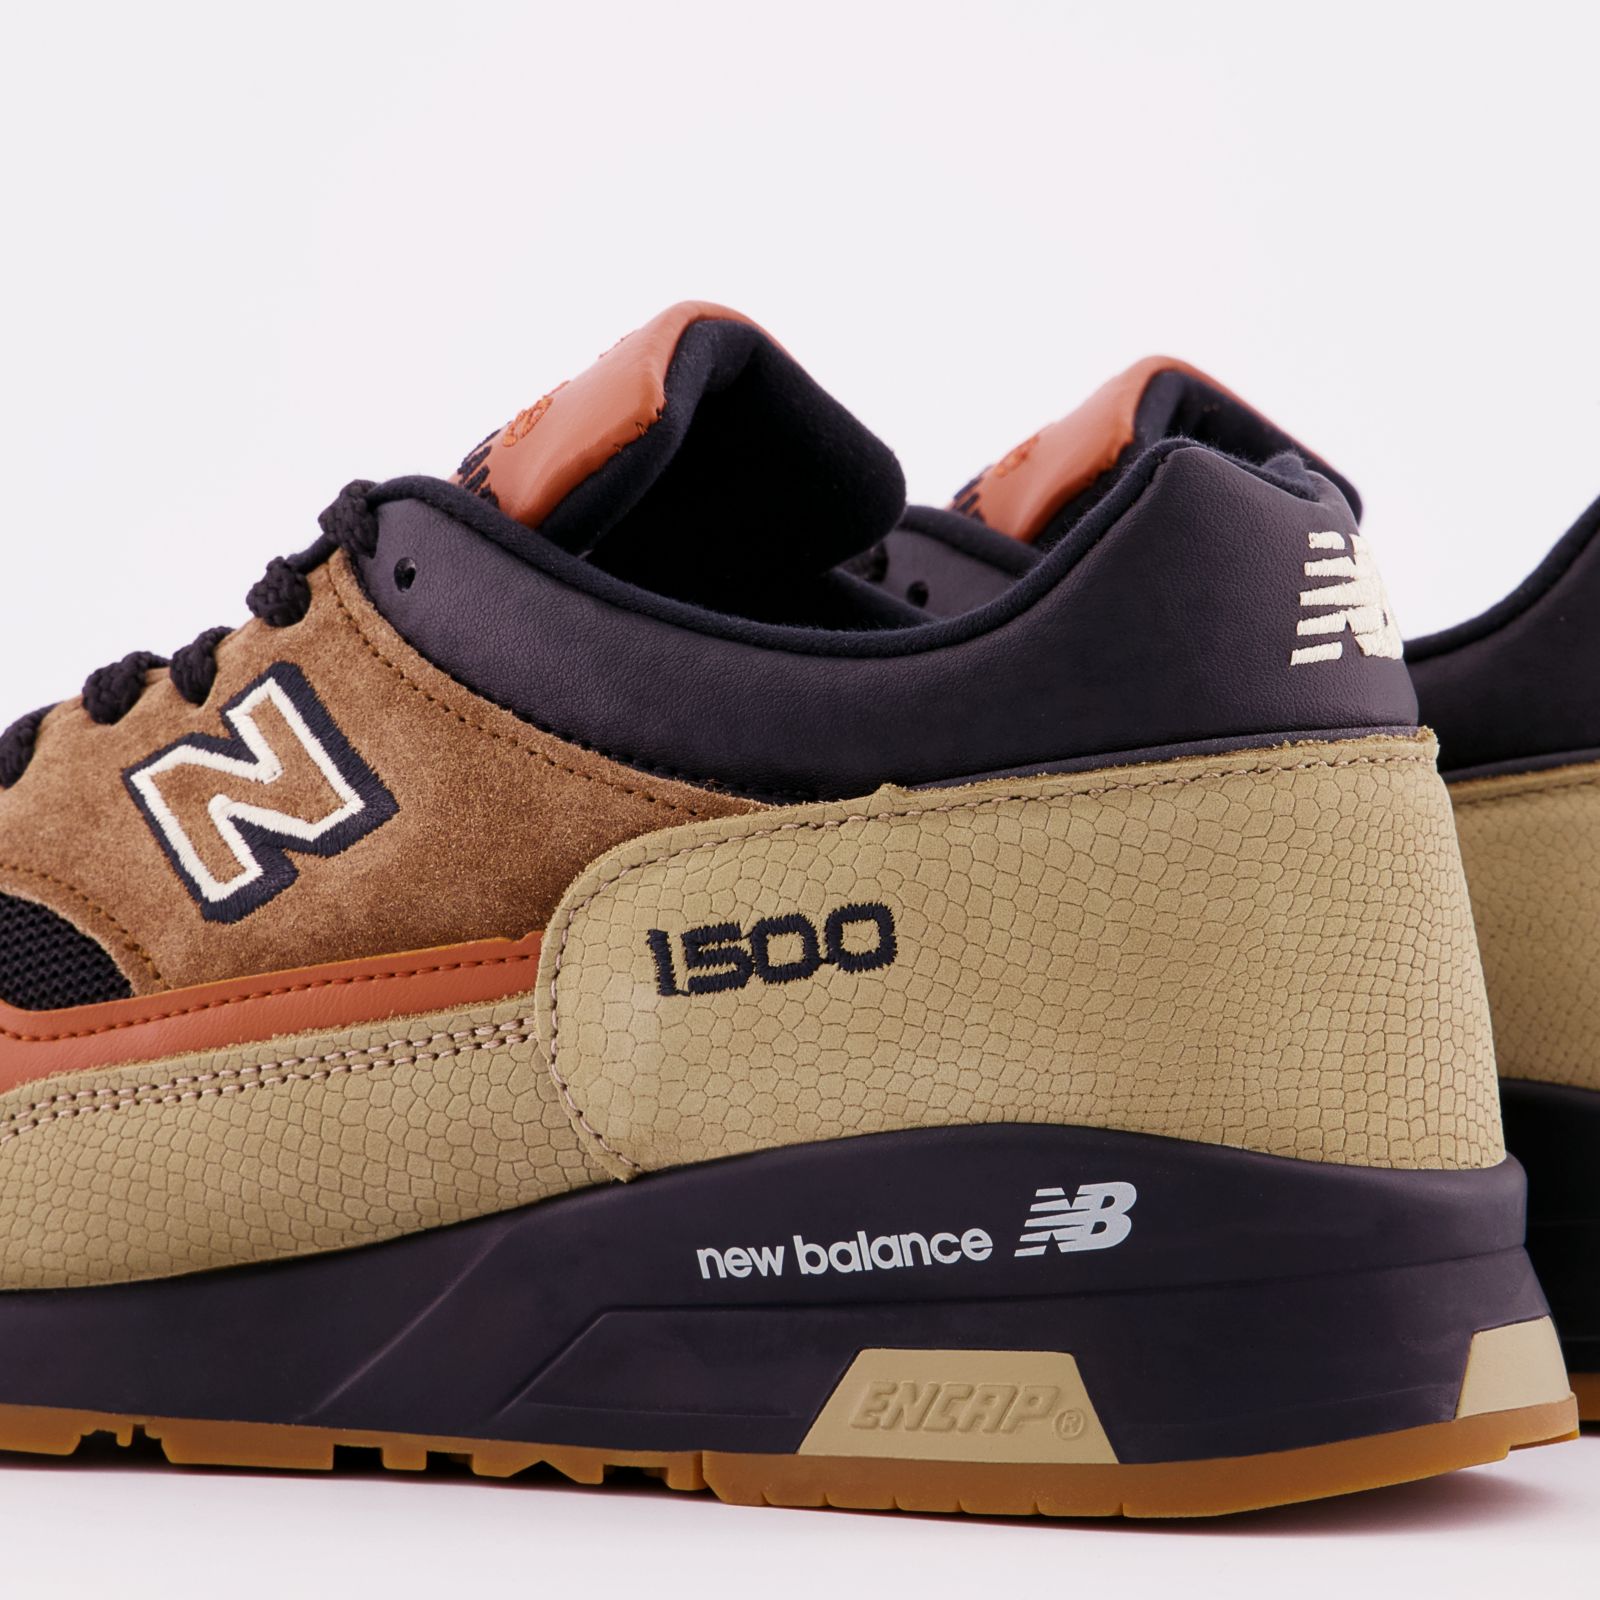 Perplejo envase actualizar Made in UK 1500 - New Balance